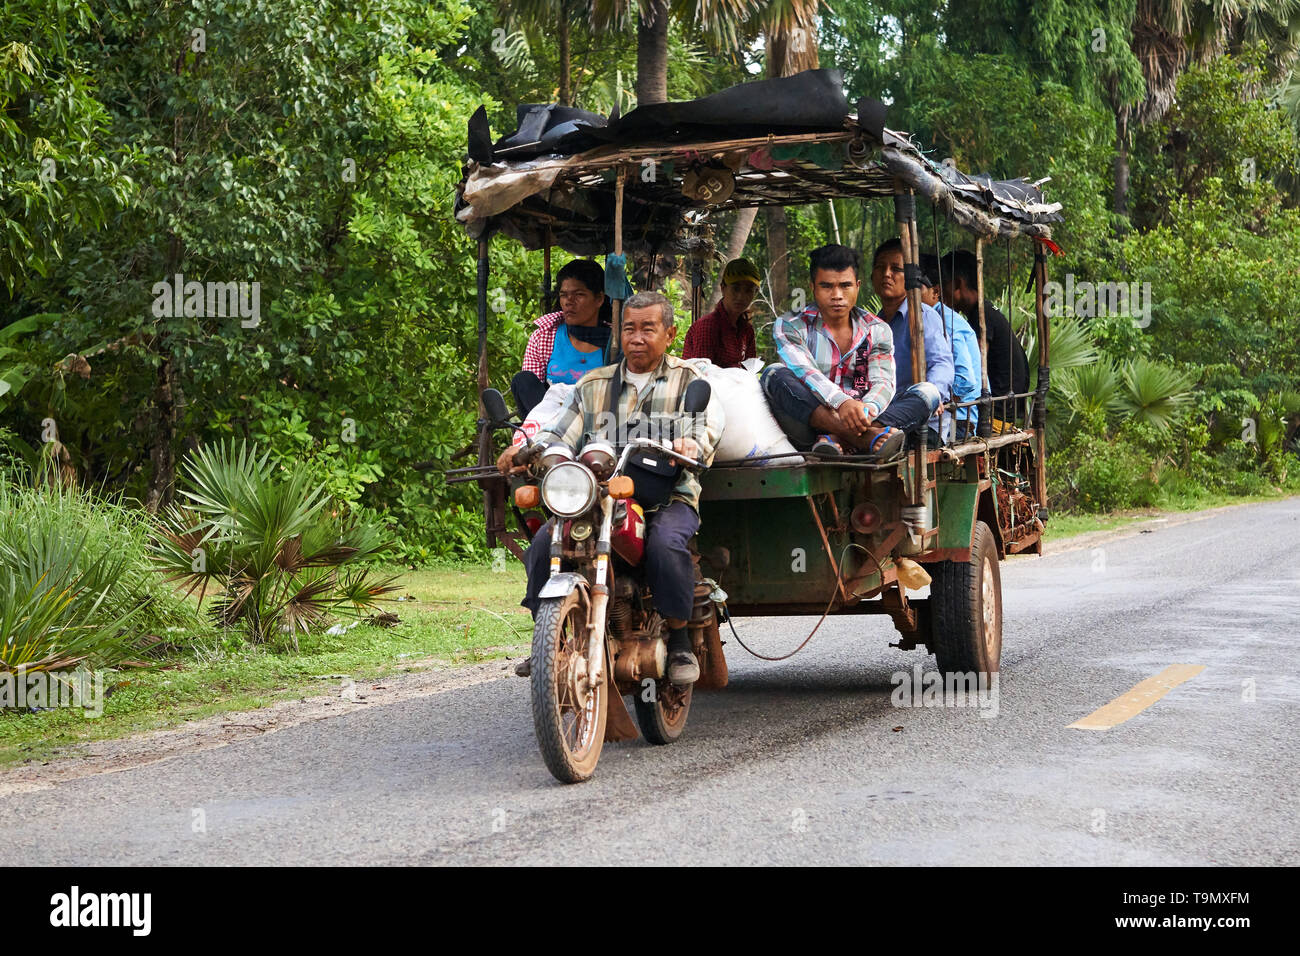 A mature Cambodian man drives a motorcycle while pulling a trailer (remorque) full of many adult passengers. Stock Photo